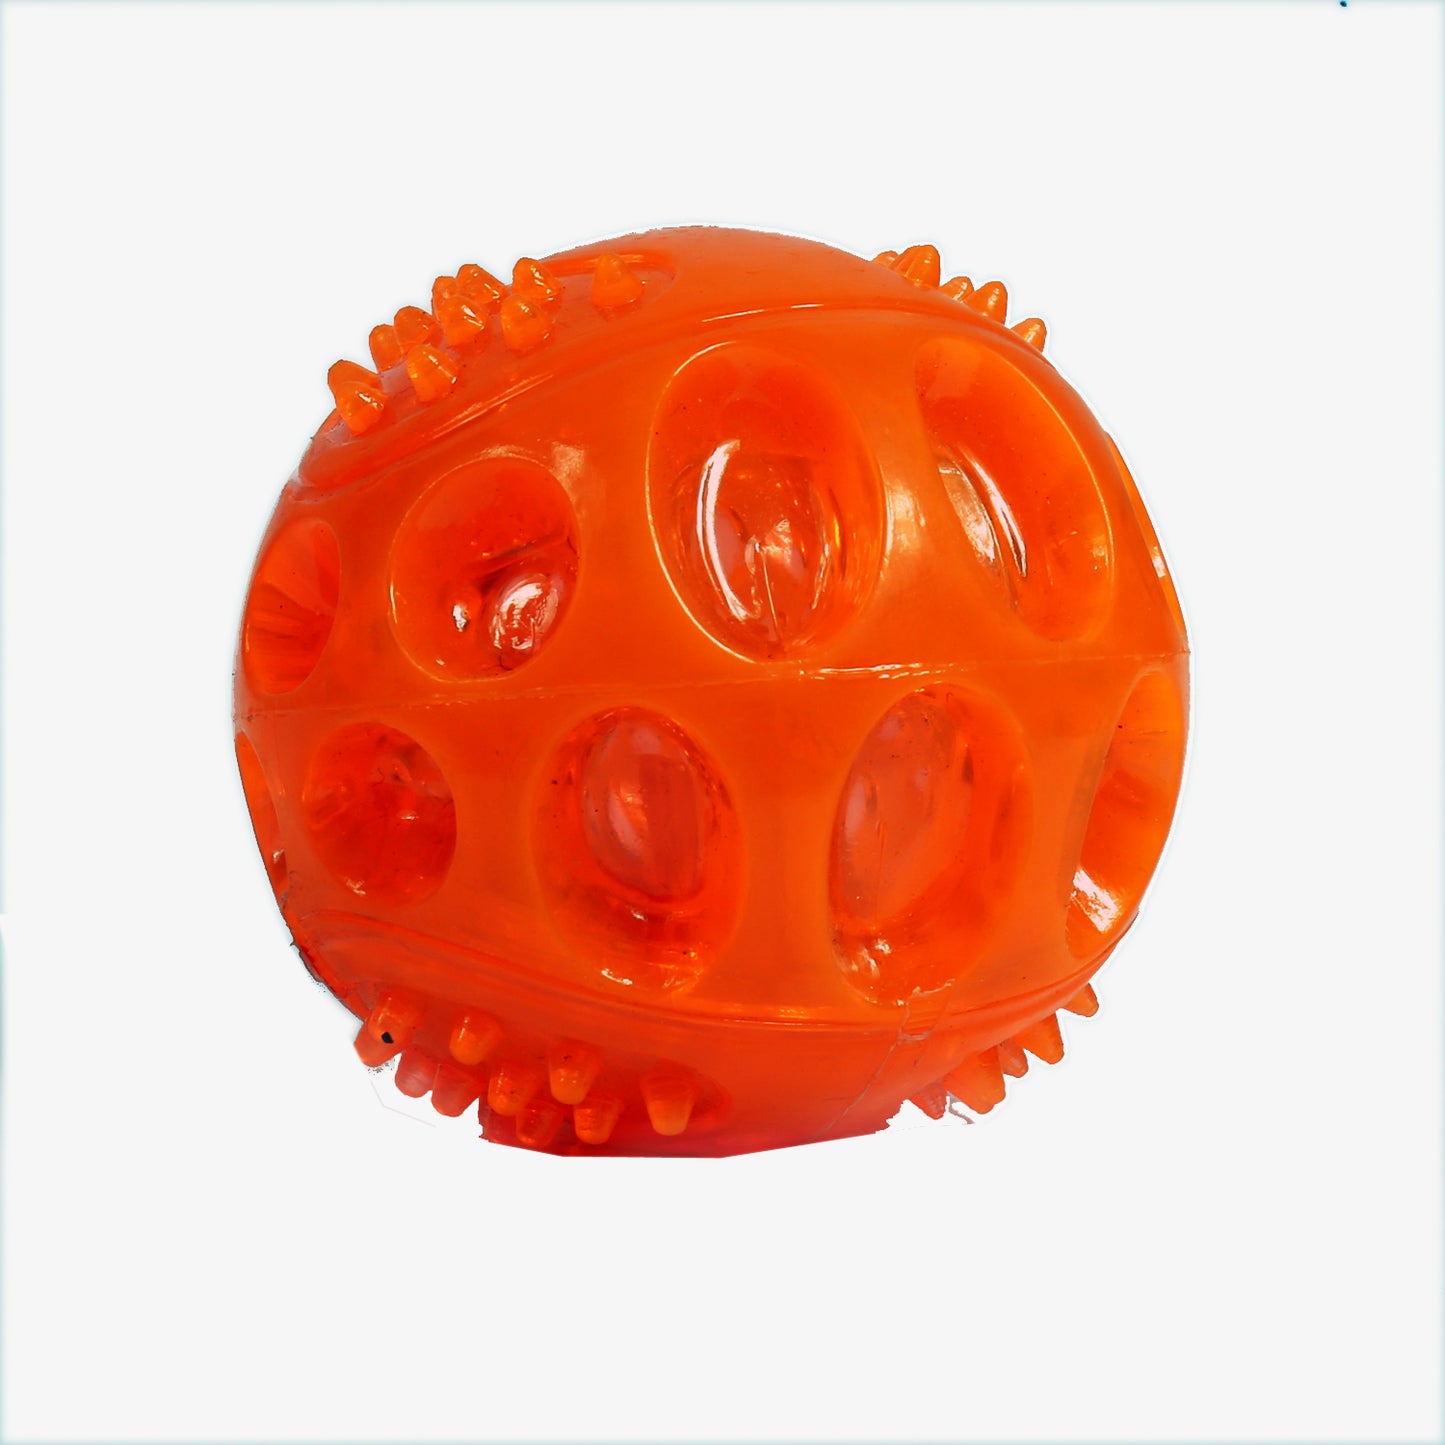 IndiHopShop Pet products Super Squeeze Ball